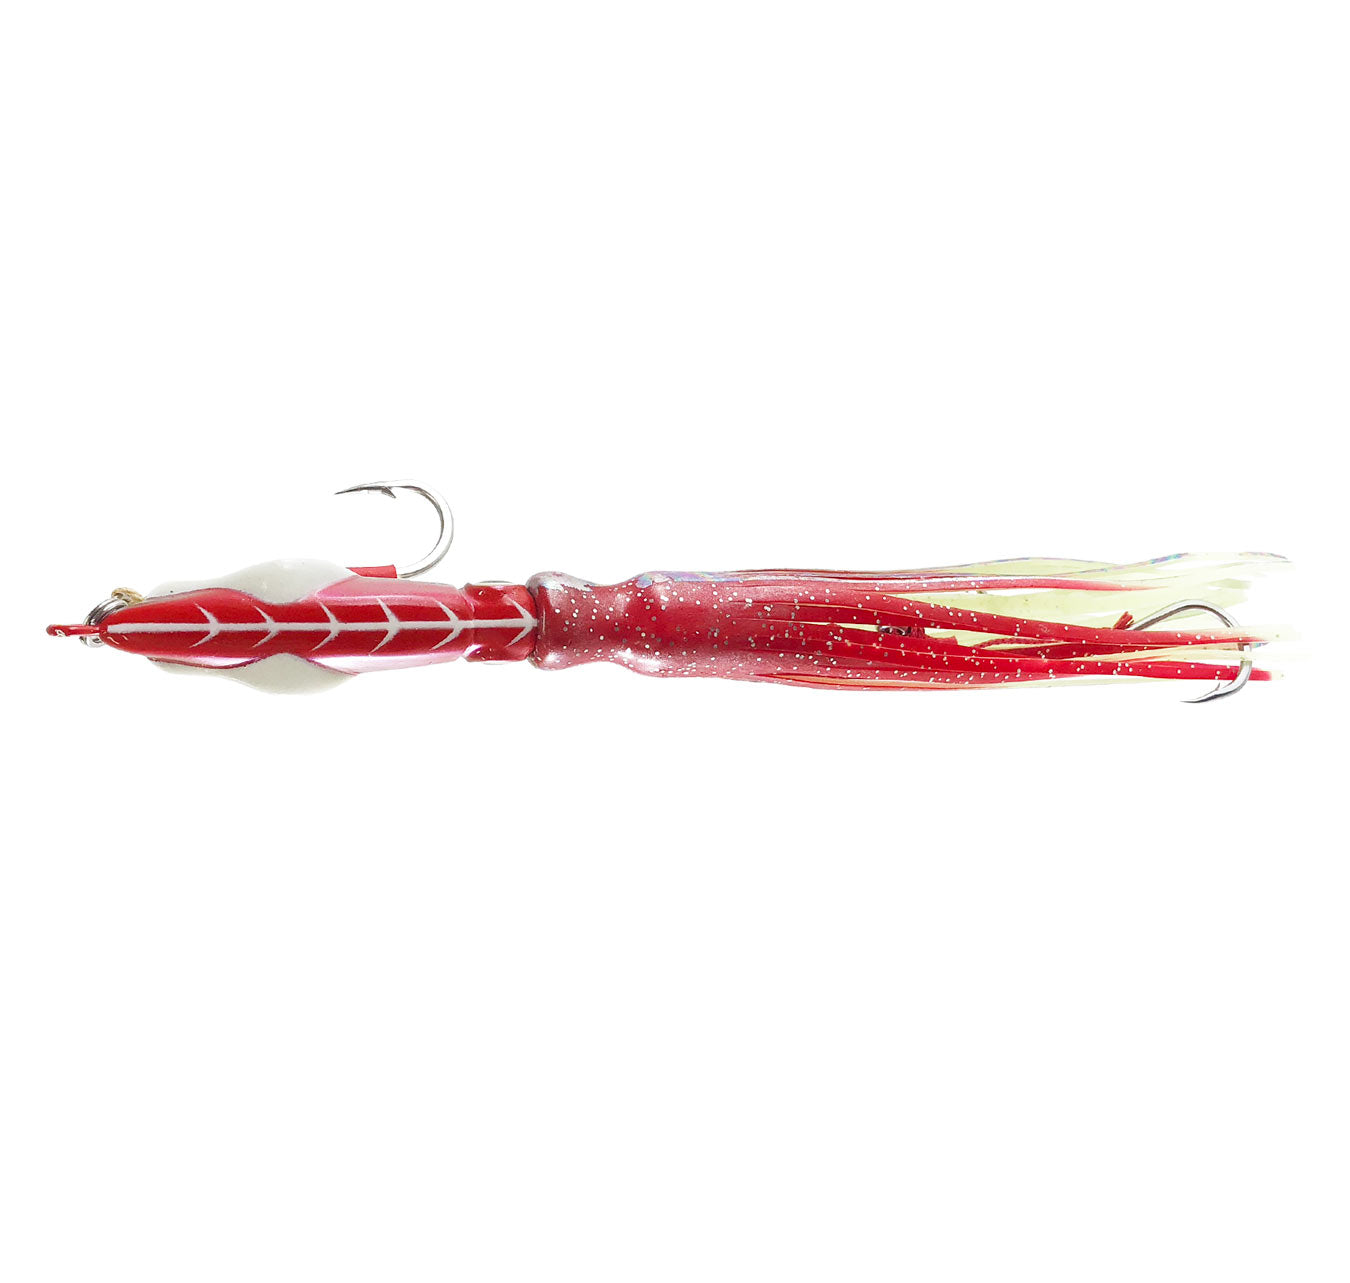 Catch Squidwings Jig Colour Red Ripper